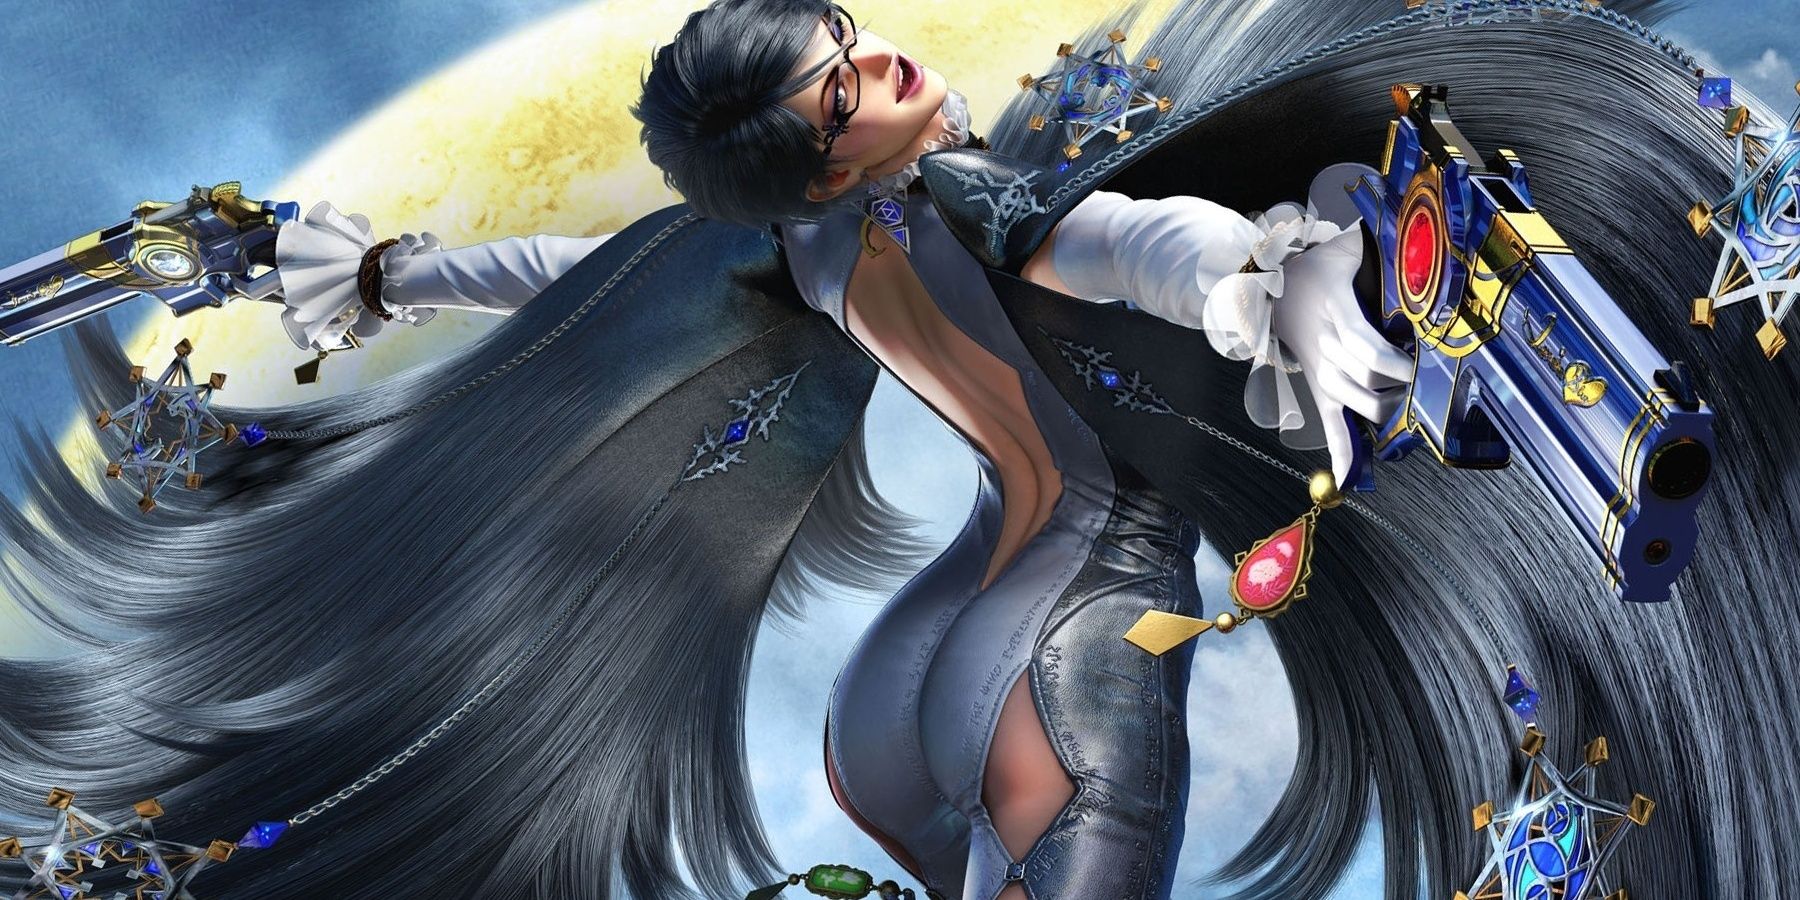 Official Cover and Promotional Art For Bayonetta 2